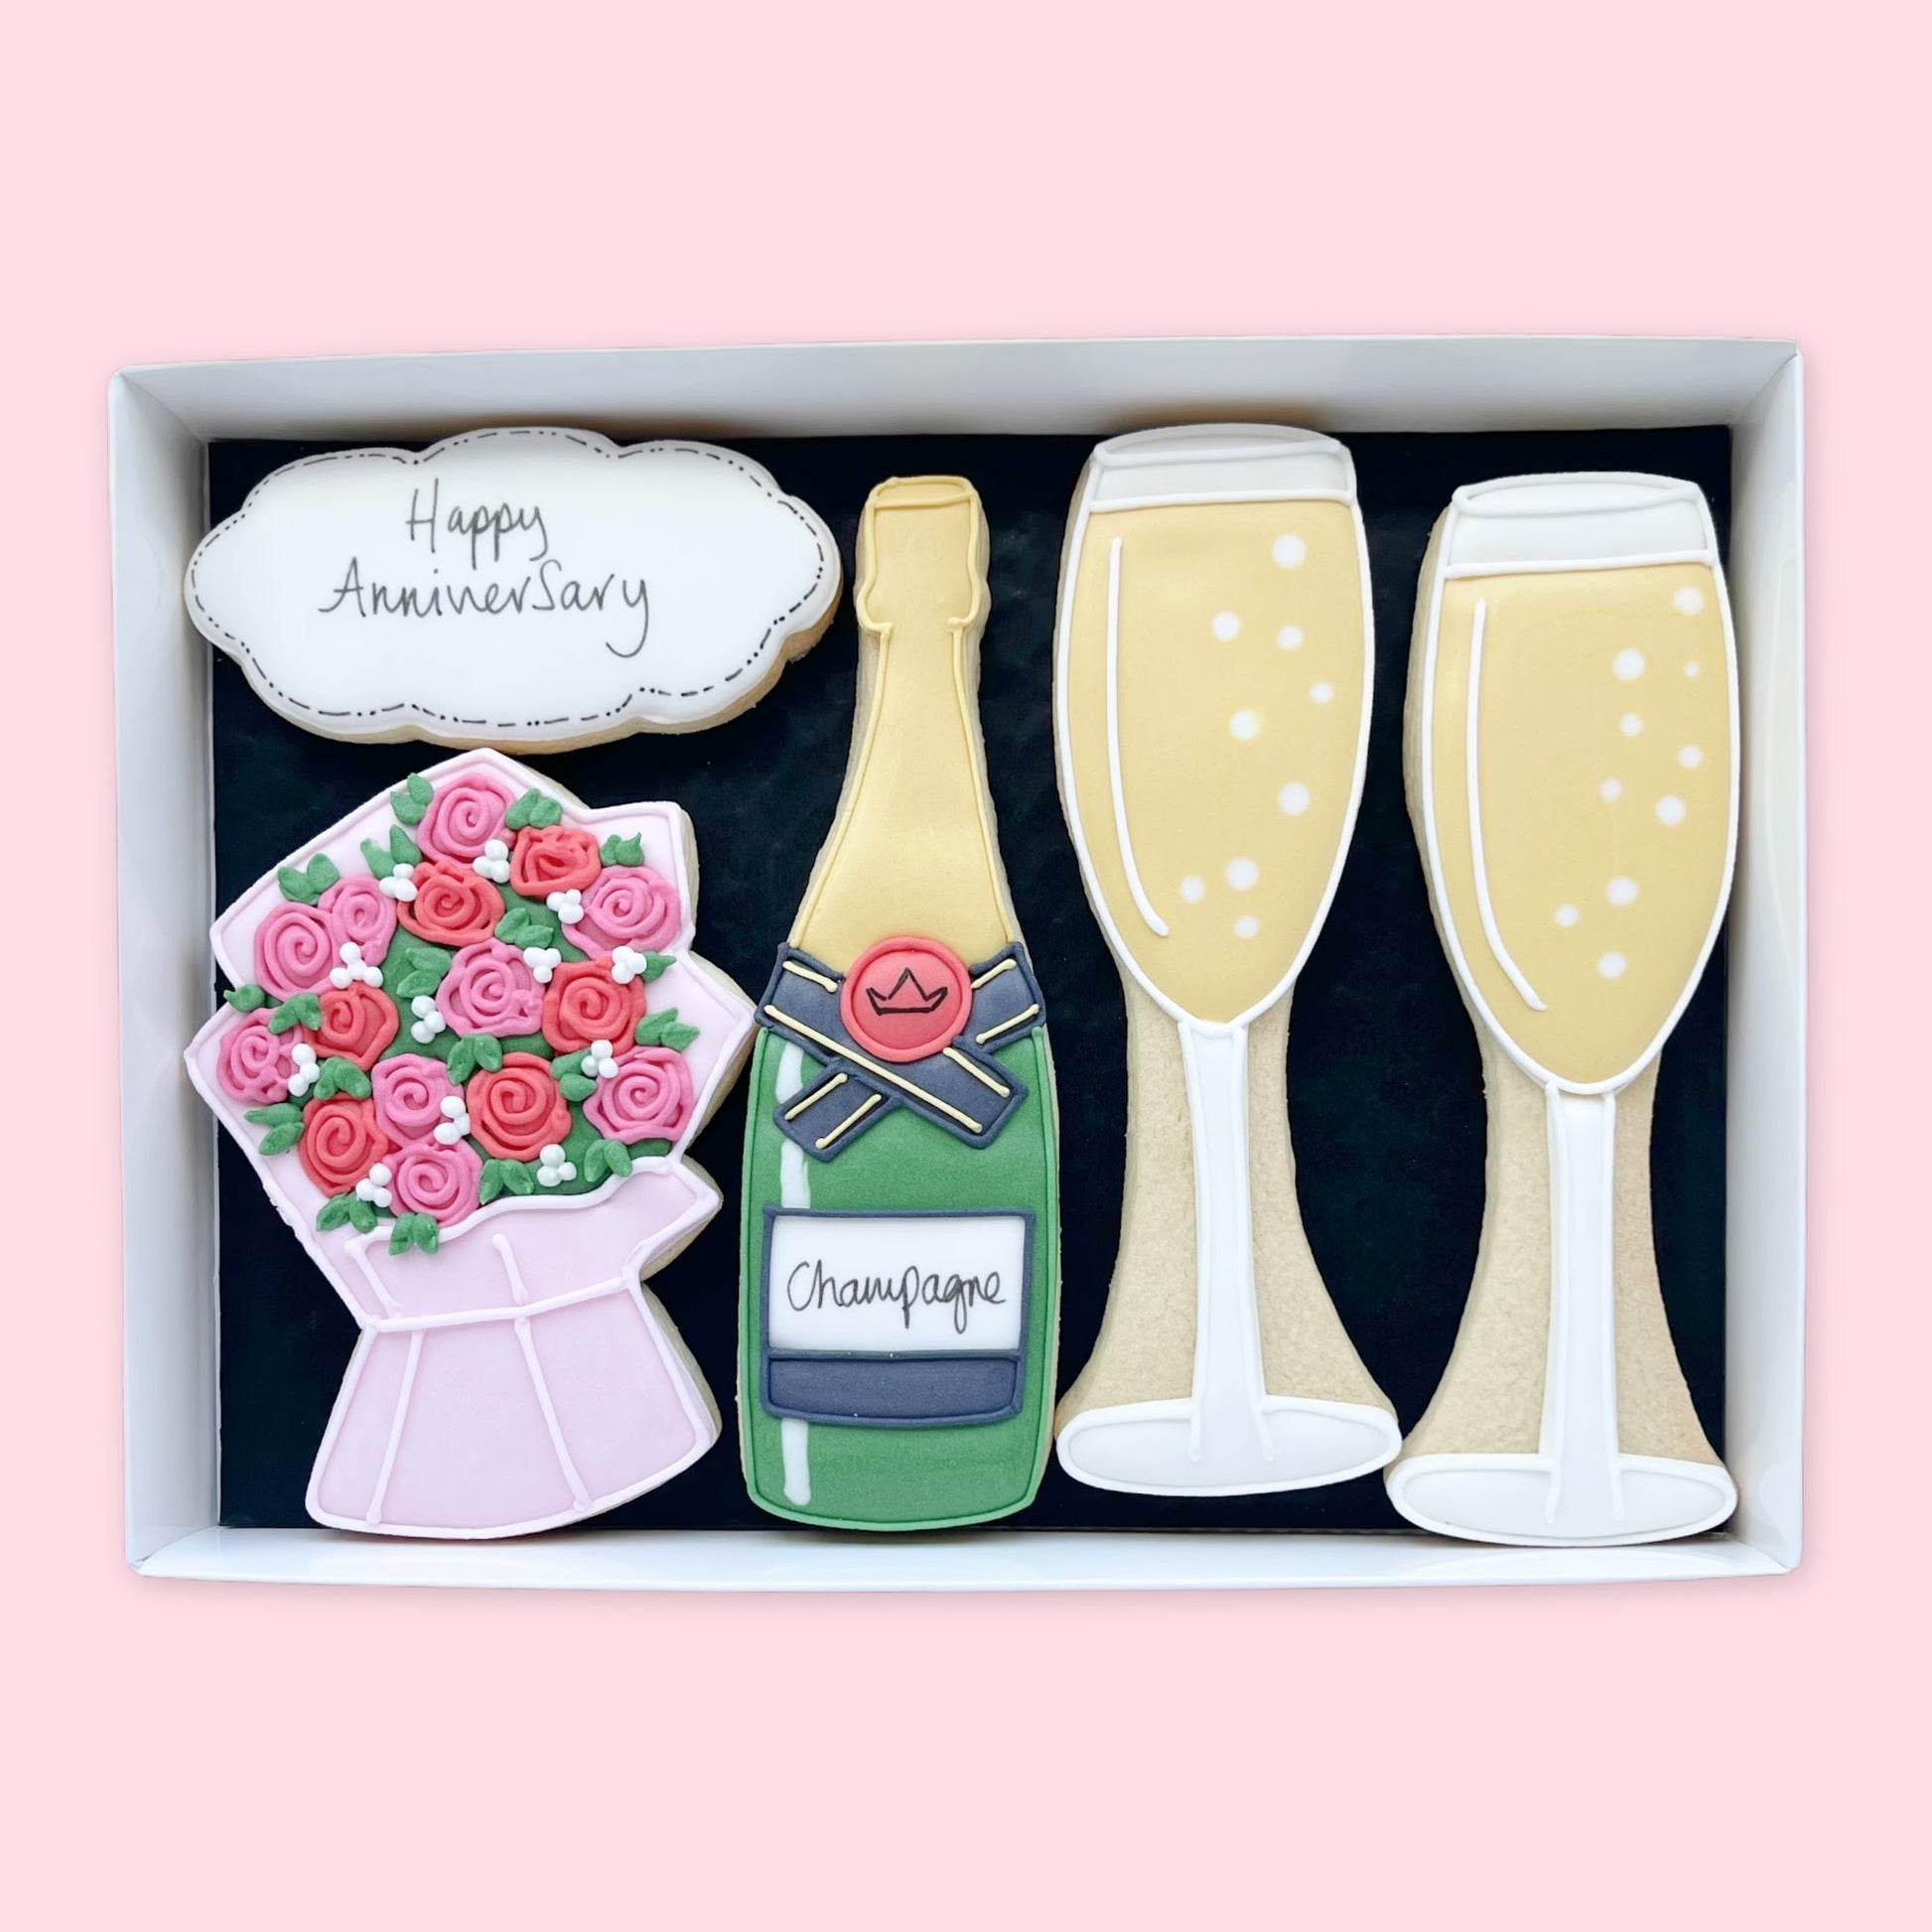 Hand Iced champagne and flowers biscuits in an open white gift box by Katie's biscuit shop  